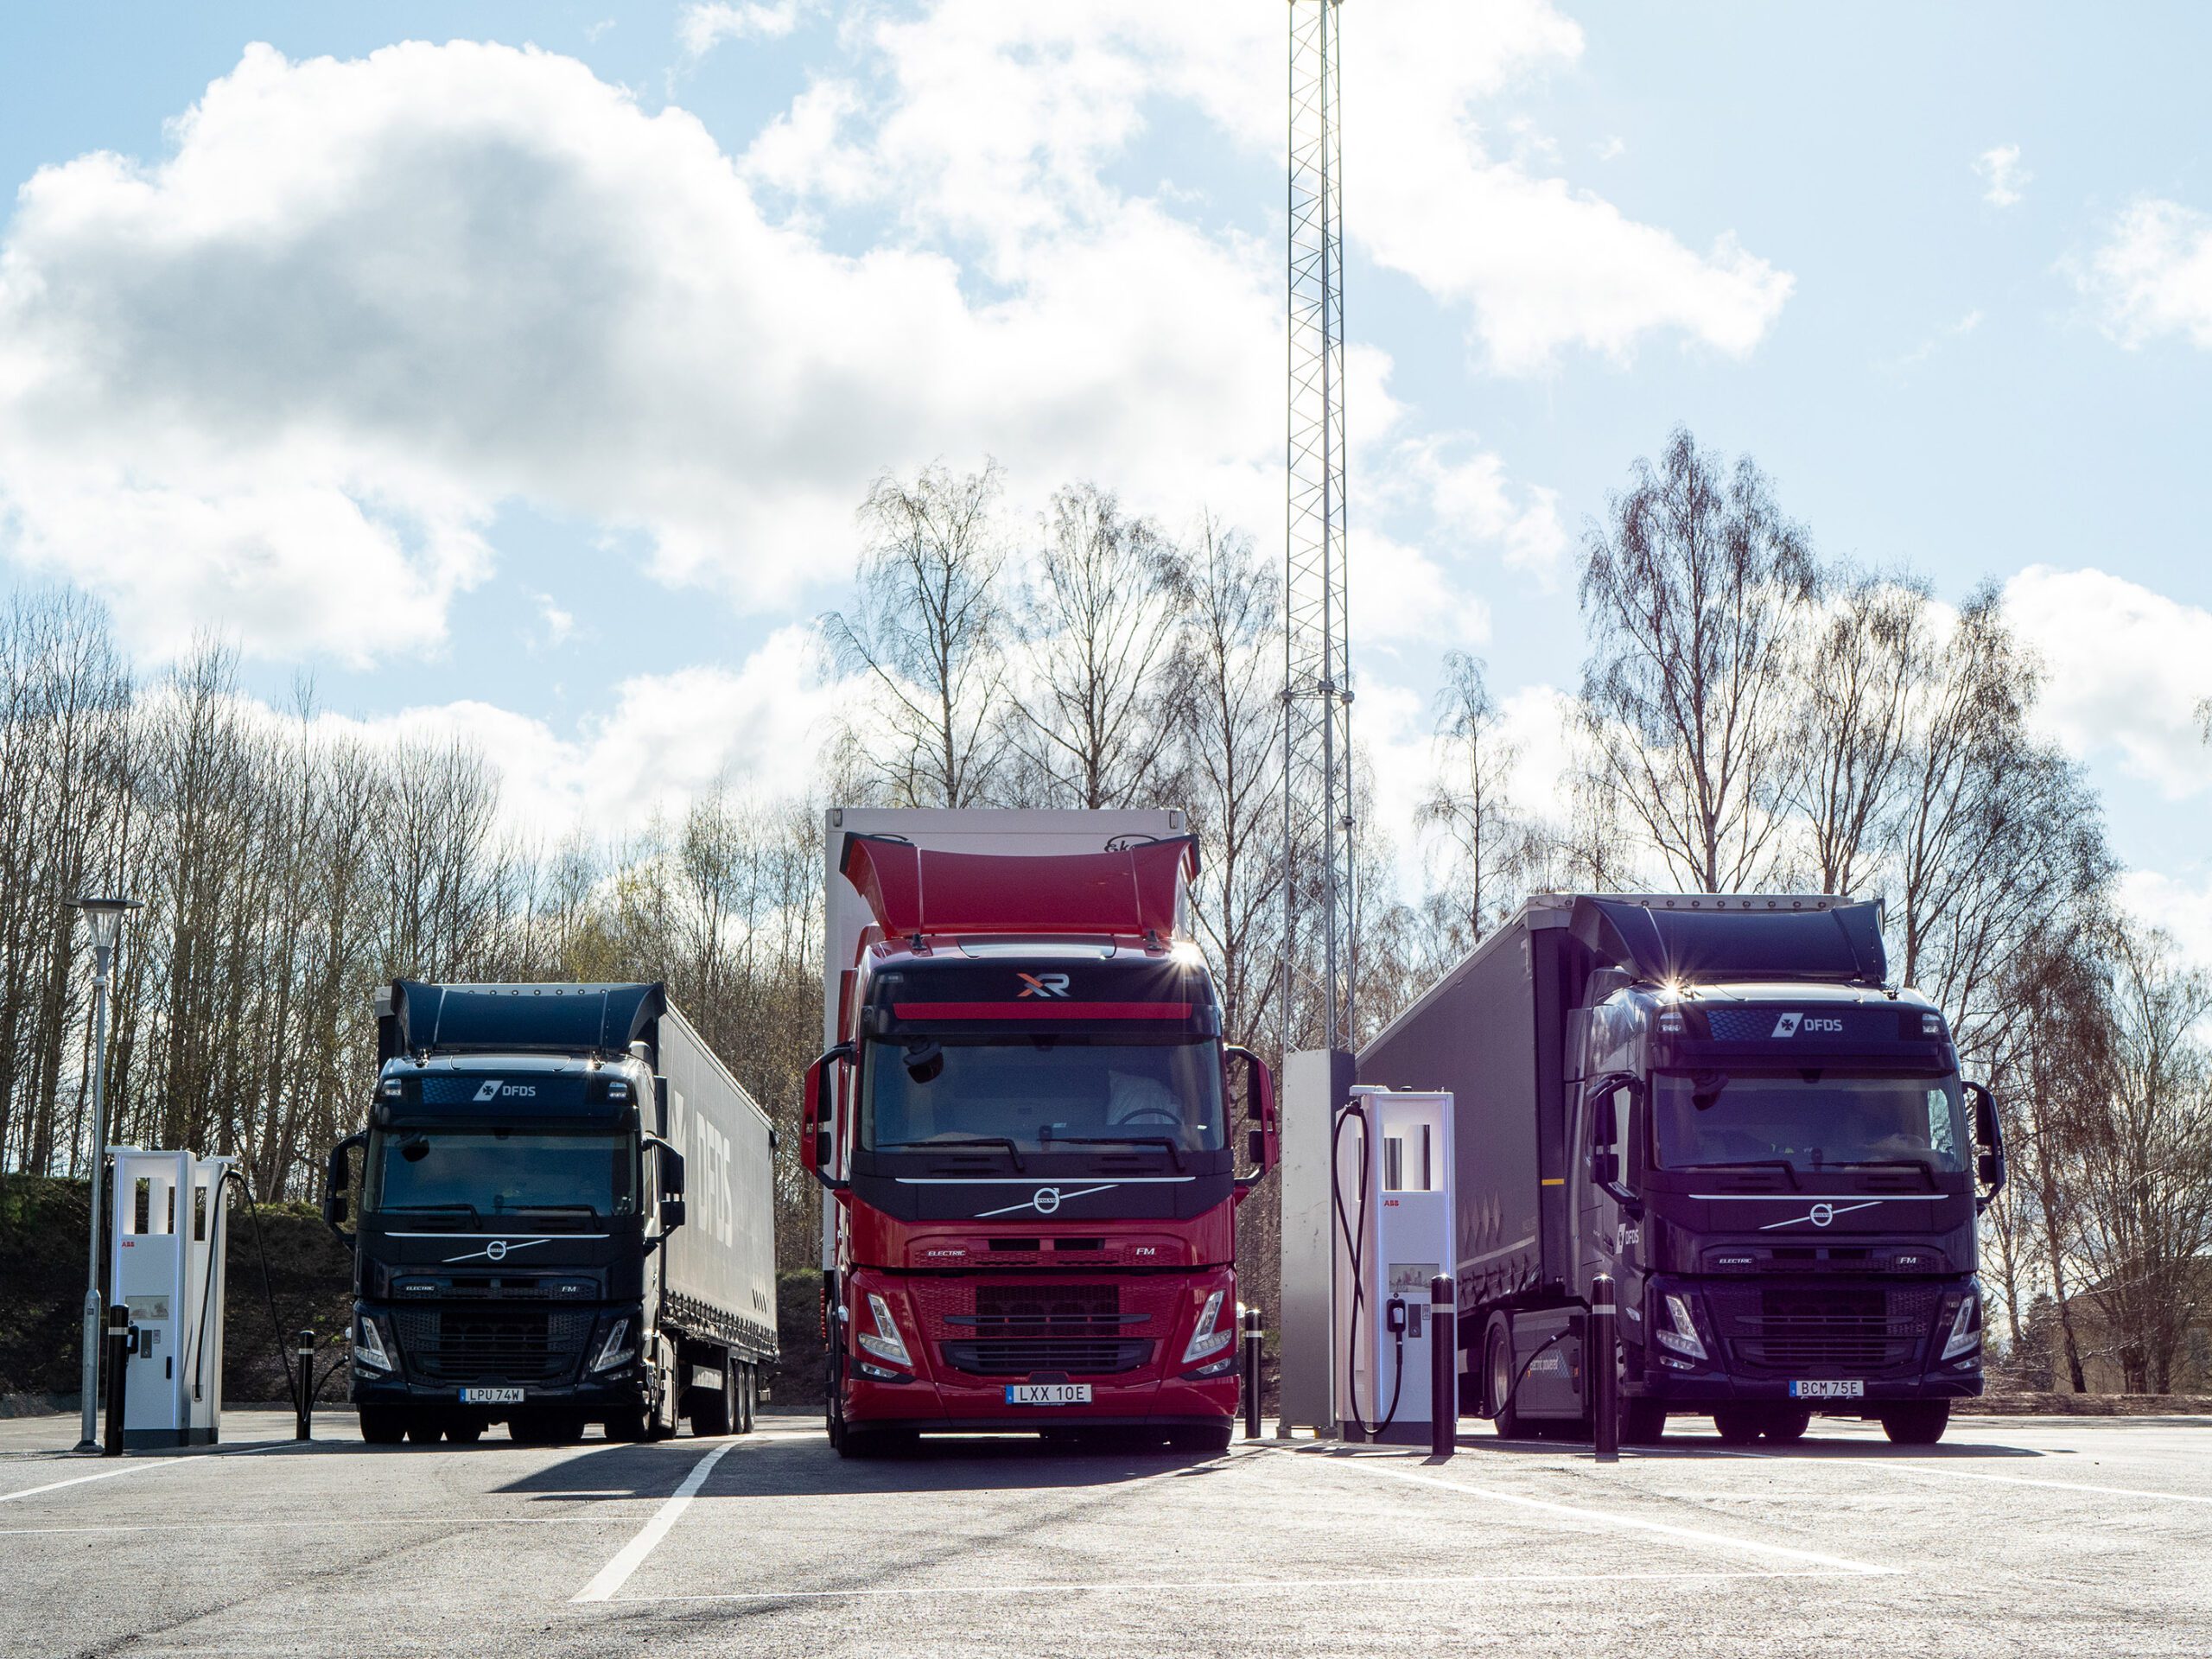 Three trucks are lined up with their fronts facing forward and between them are charging stations for heavy battery charging.